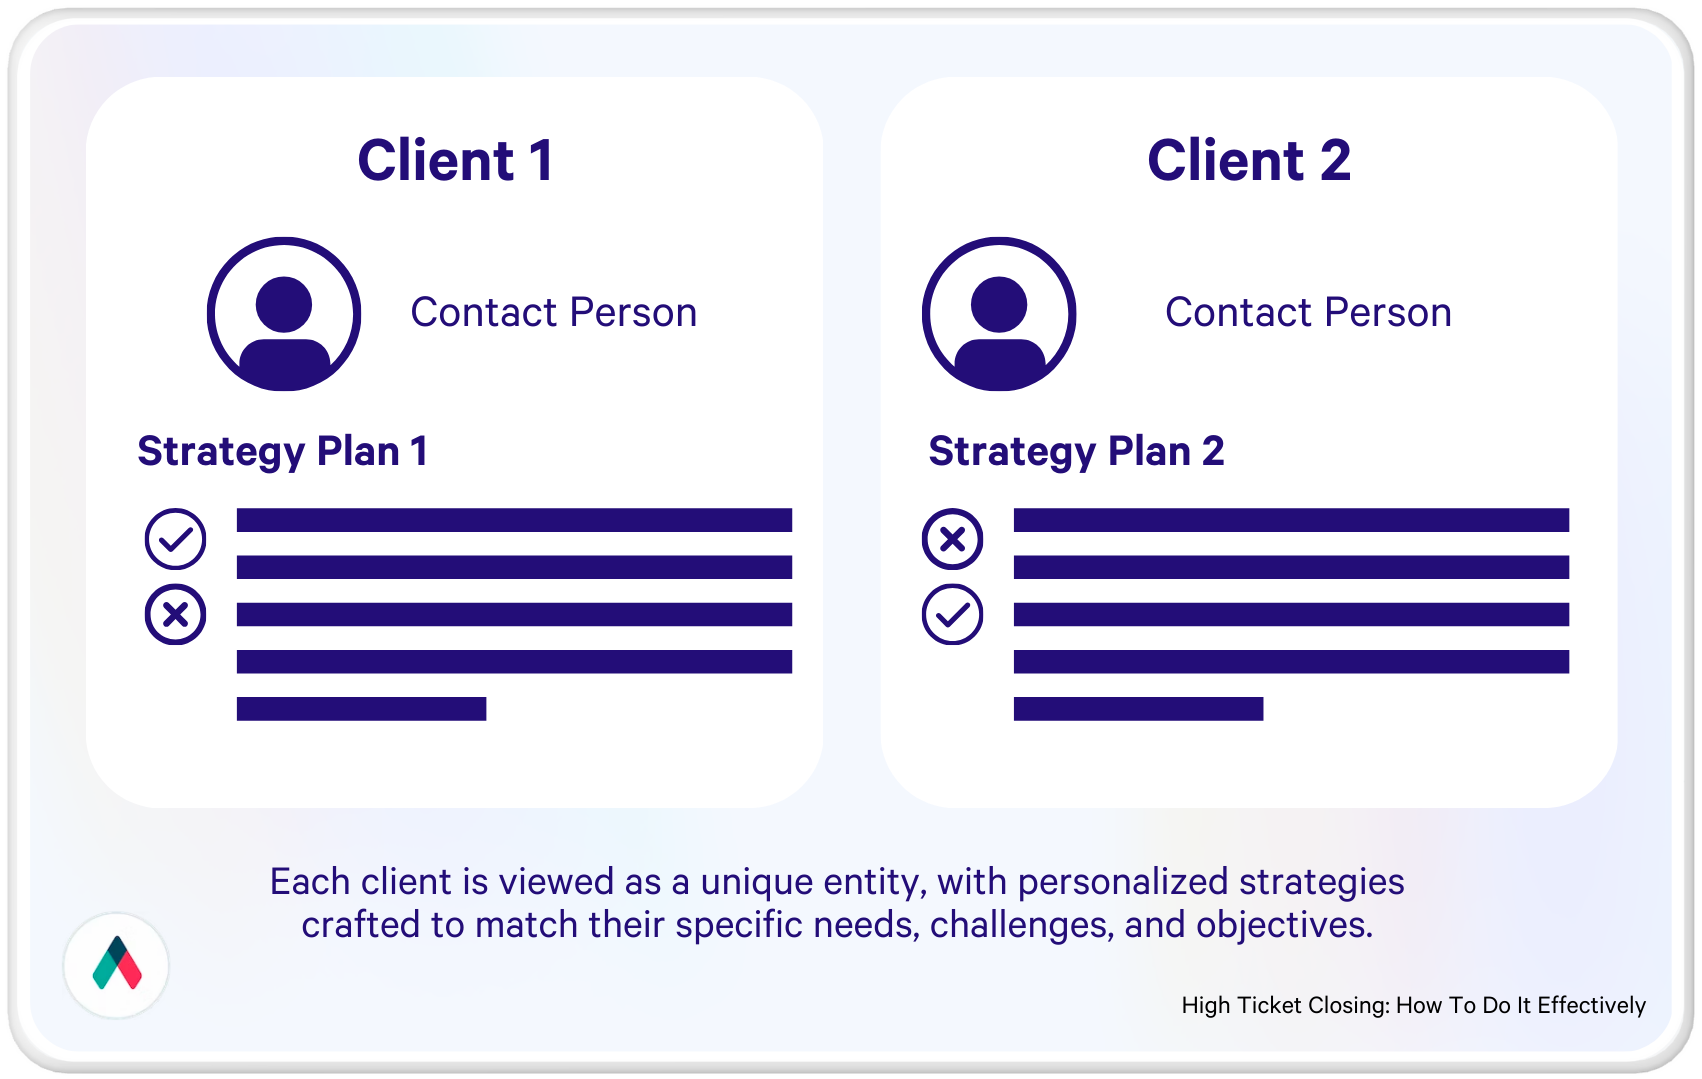 a strategy plan for client 1 and client 2 is shown